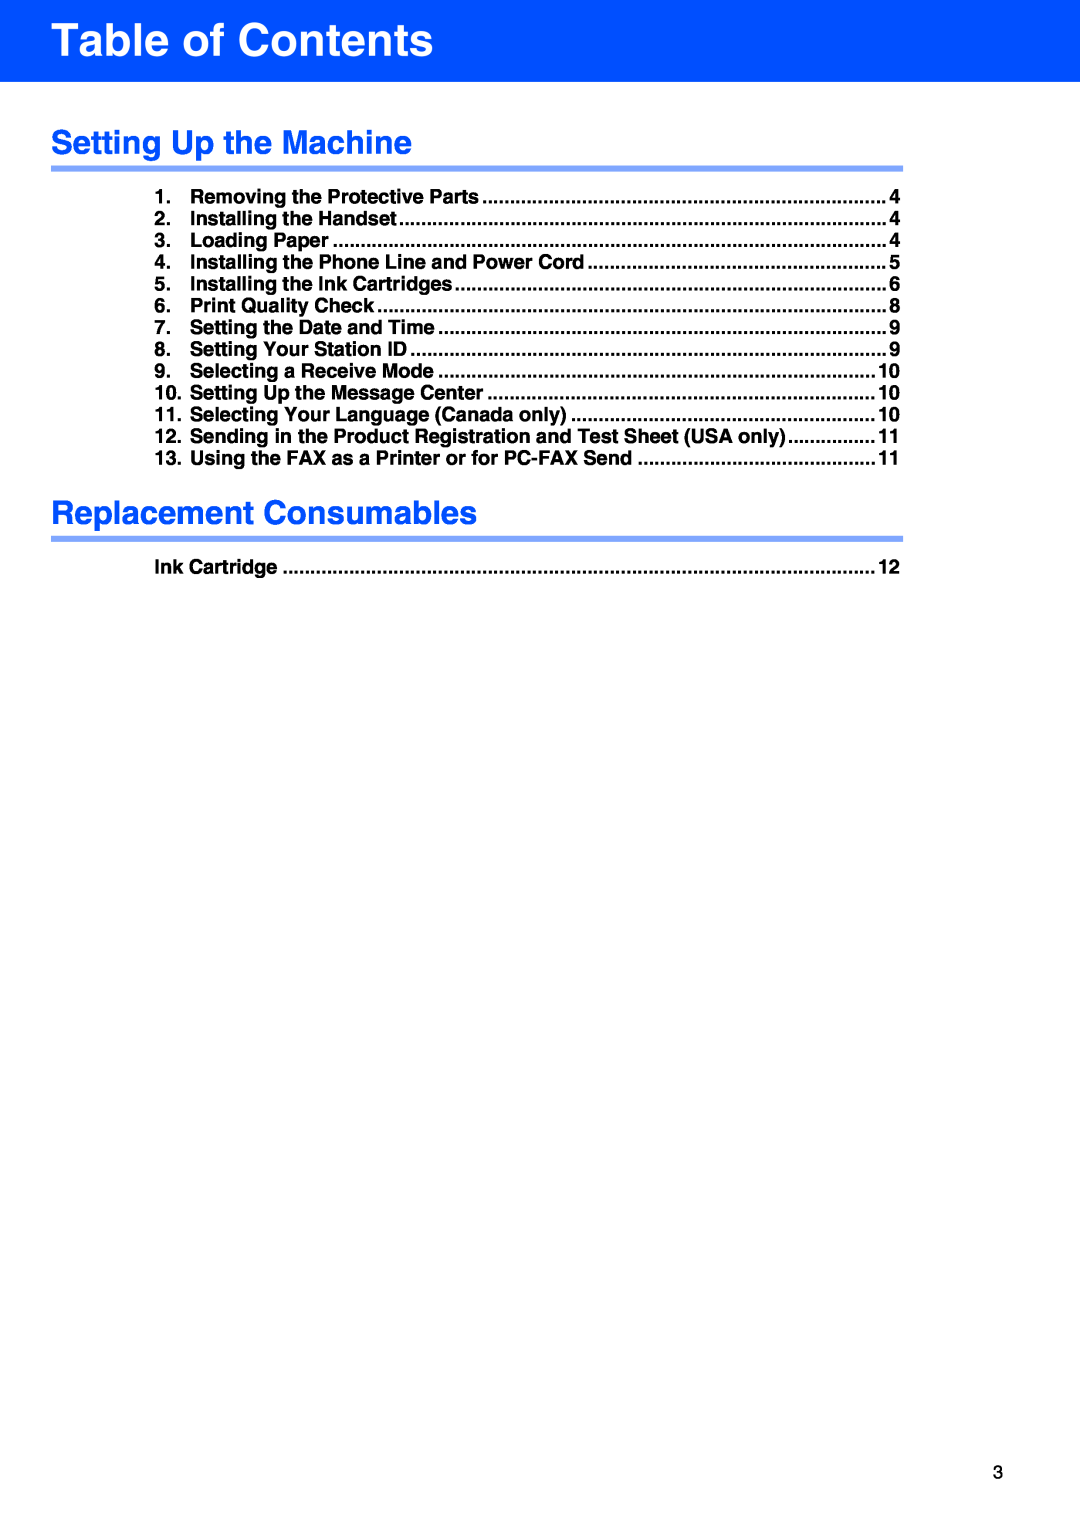 Brother FAX-2440C Table of Contents, Selecting a Receive Mode, Selecting Your Language Canada only, Ink Cartridge 